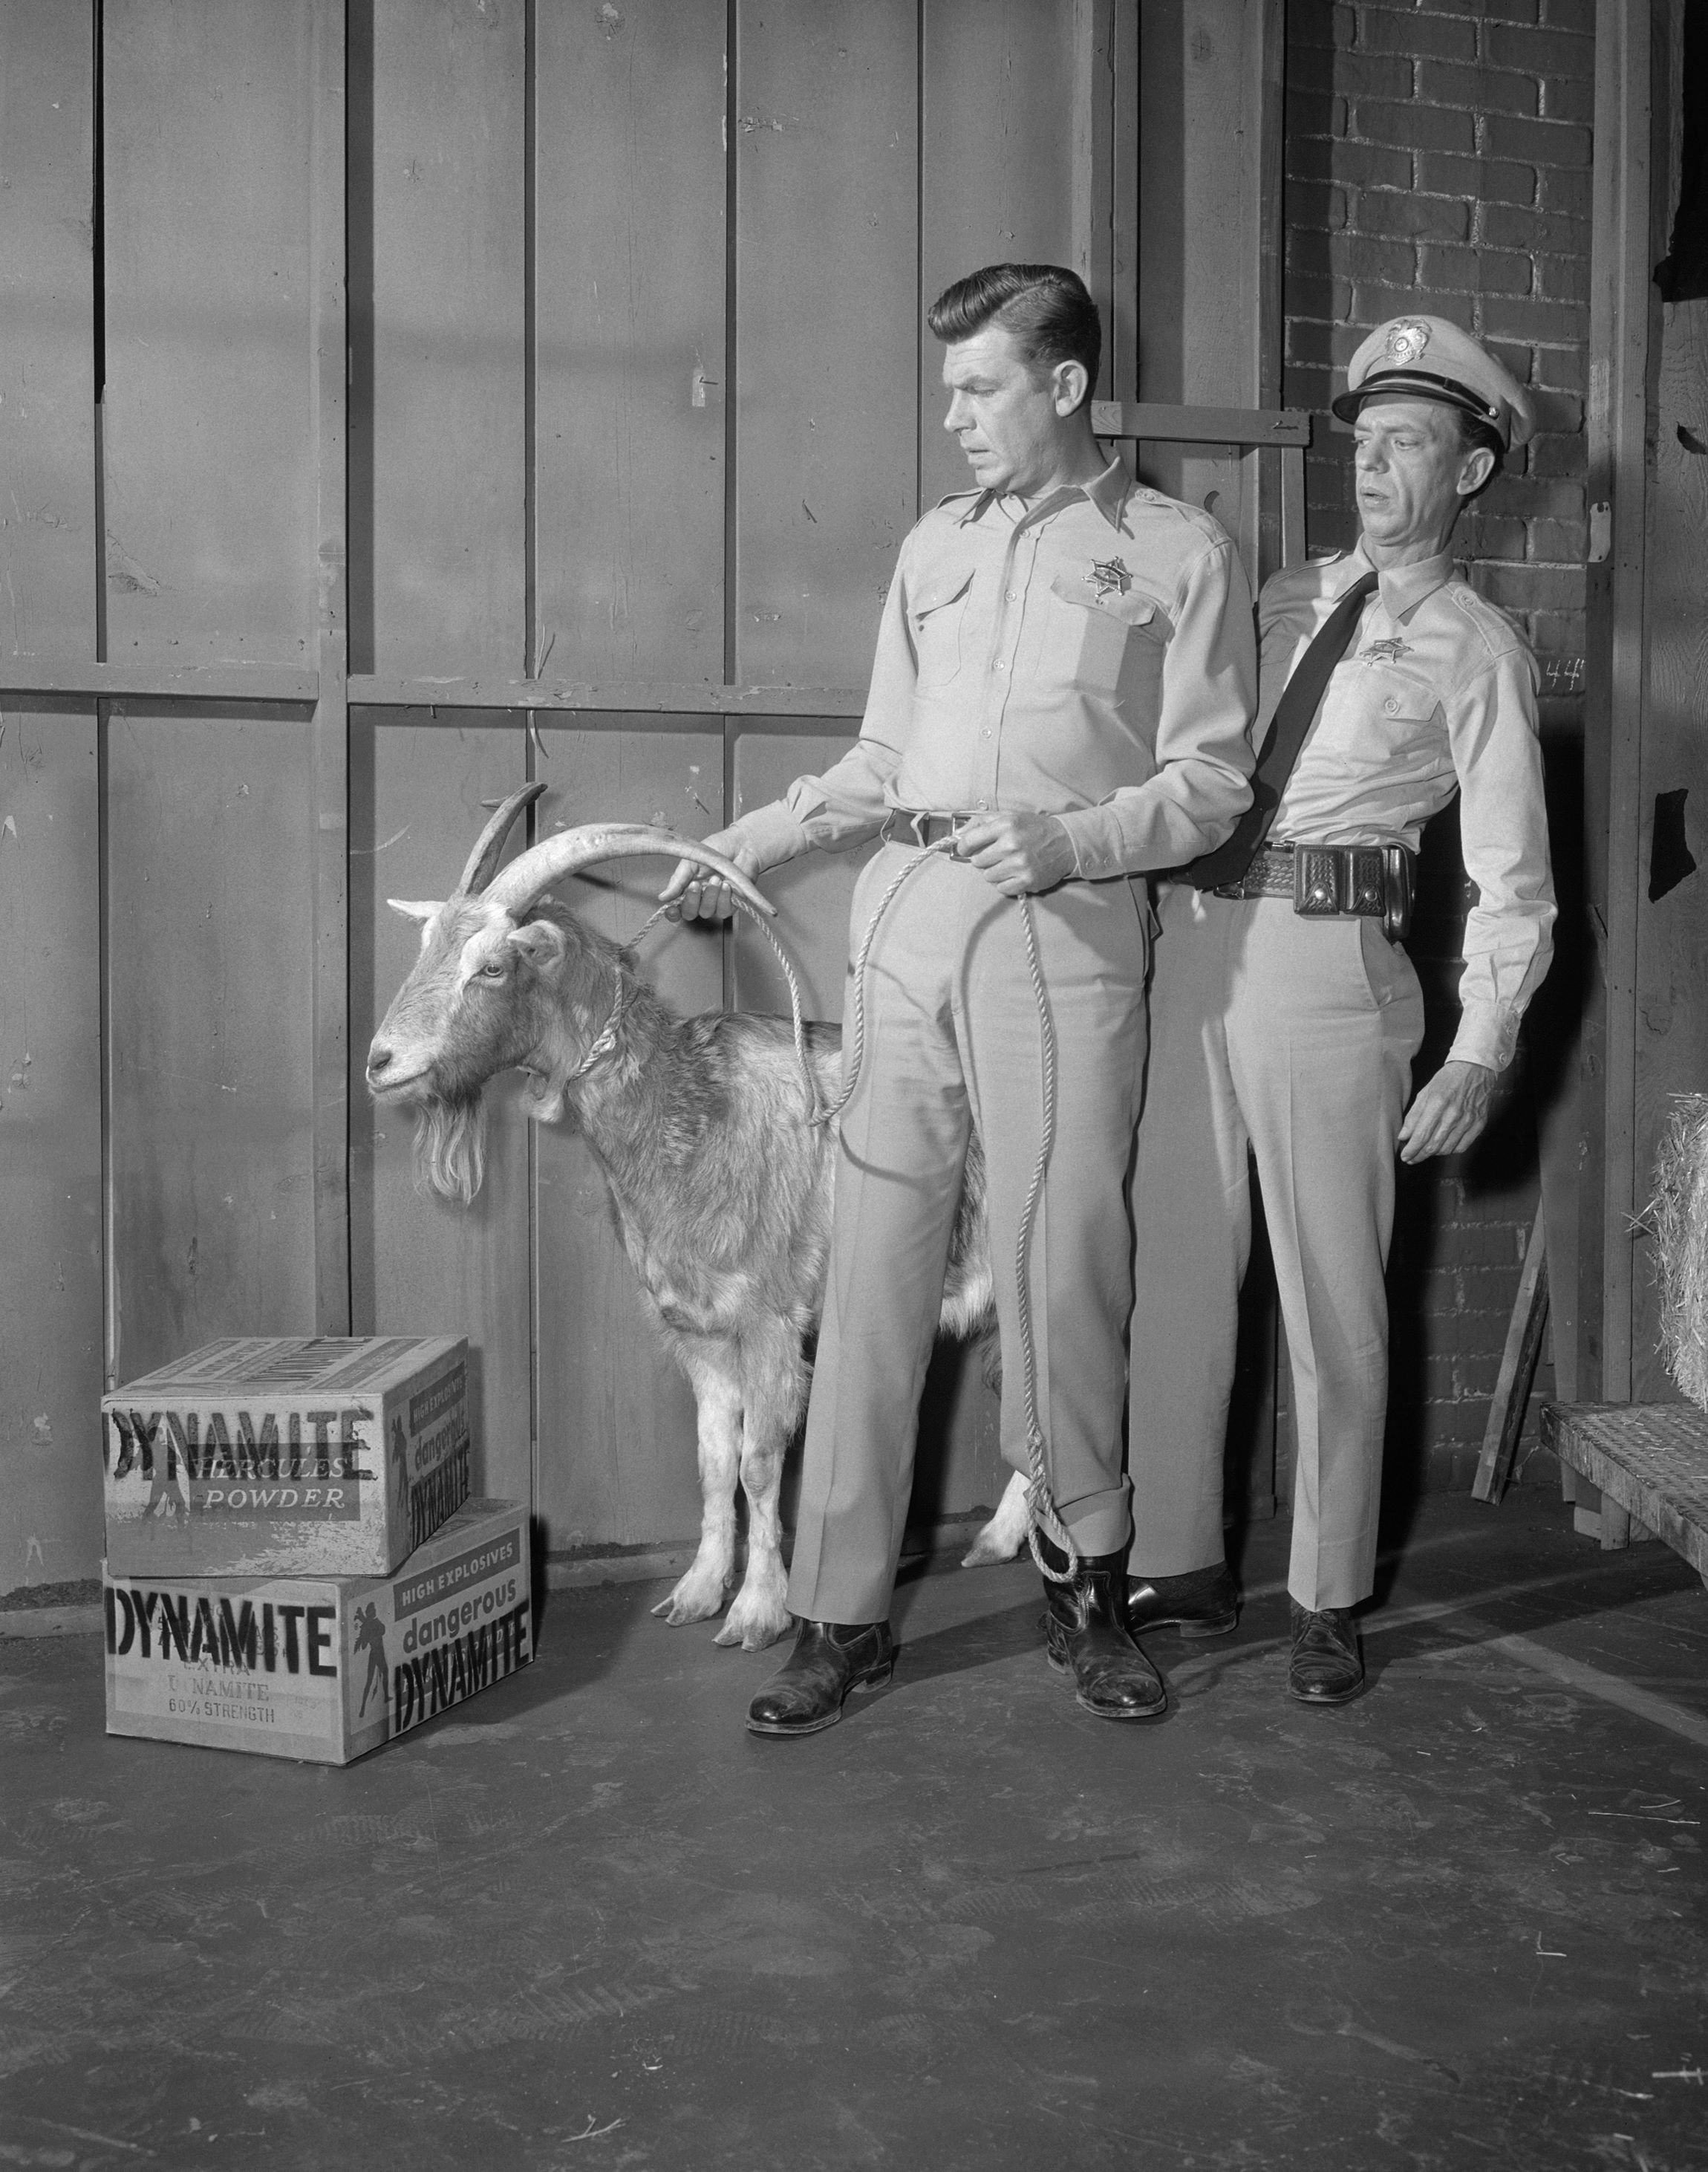 Jimmy the loaded goat, Andy Griffith, and Don Knotts in episode: "The Loaded Goat" on "The Andy Griffith Show." Image dated December 4, 1962 | Photo: CBS/Getty Images